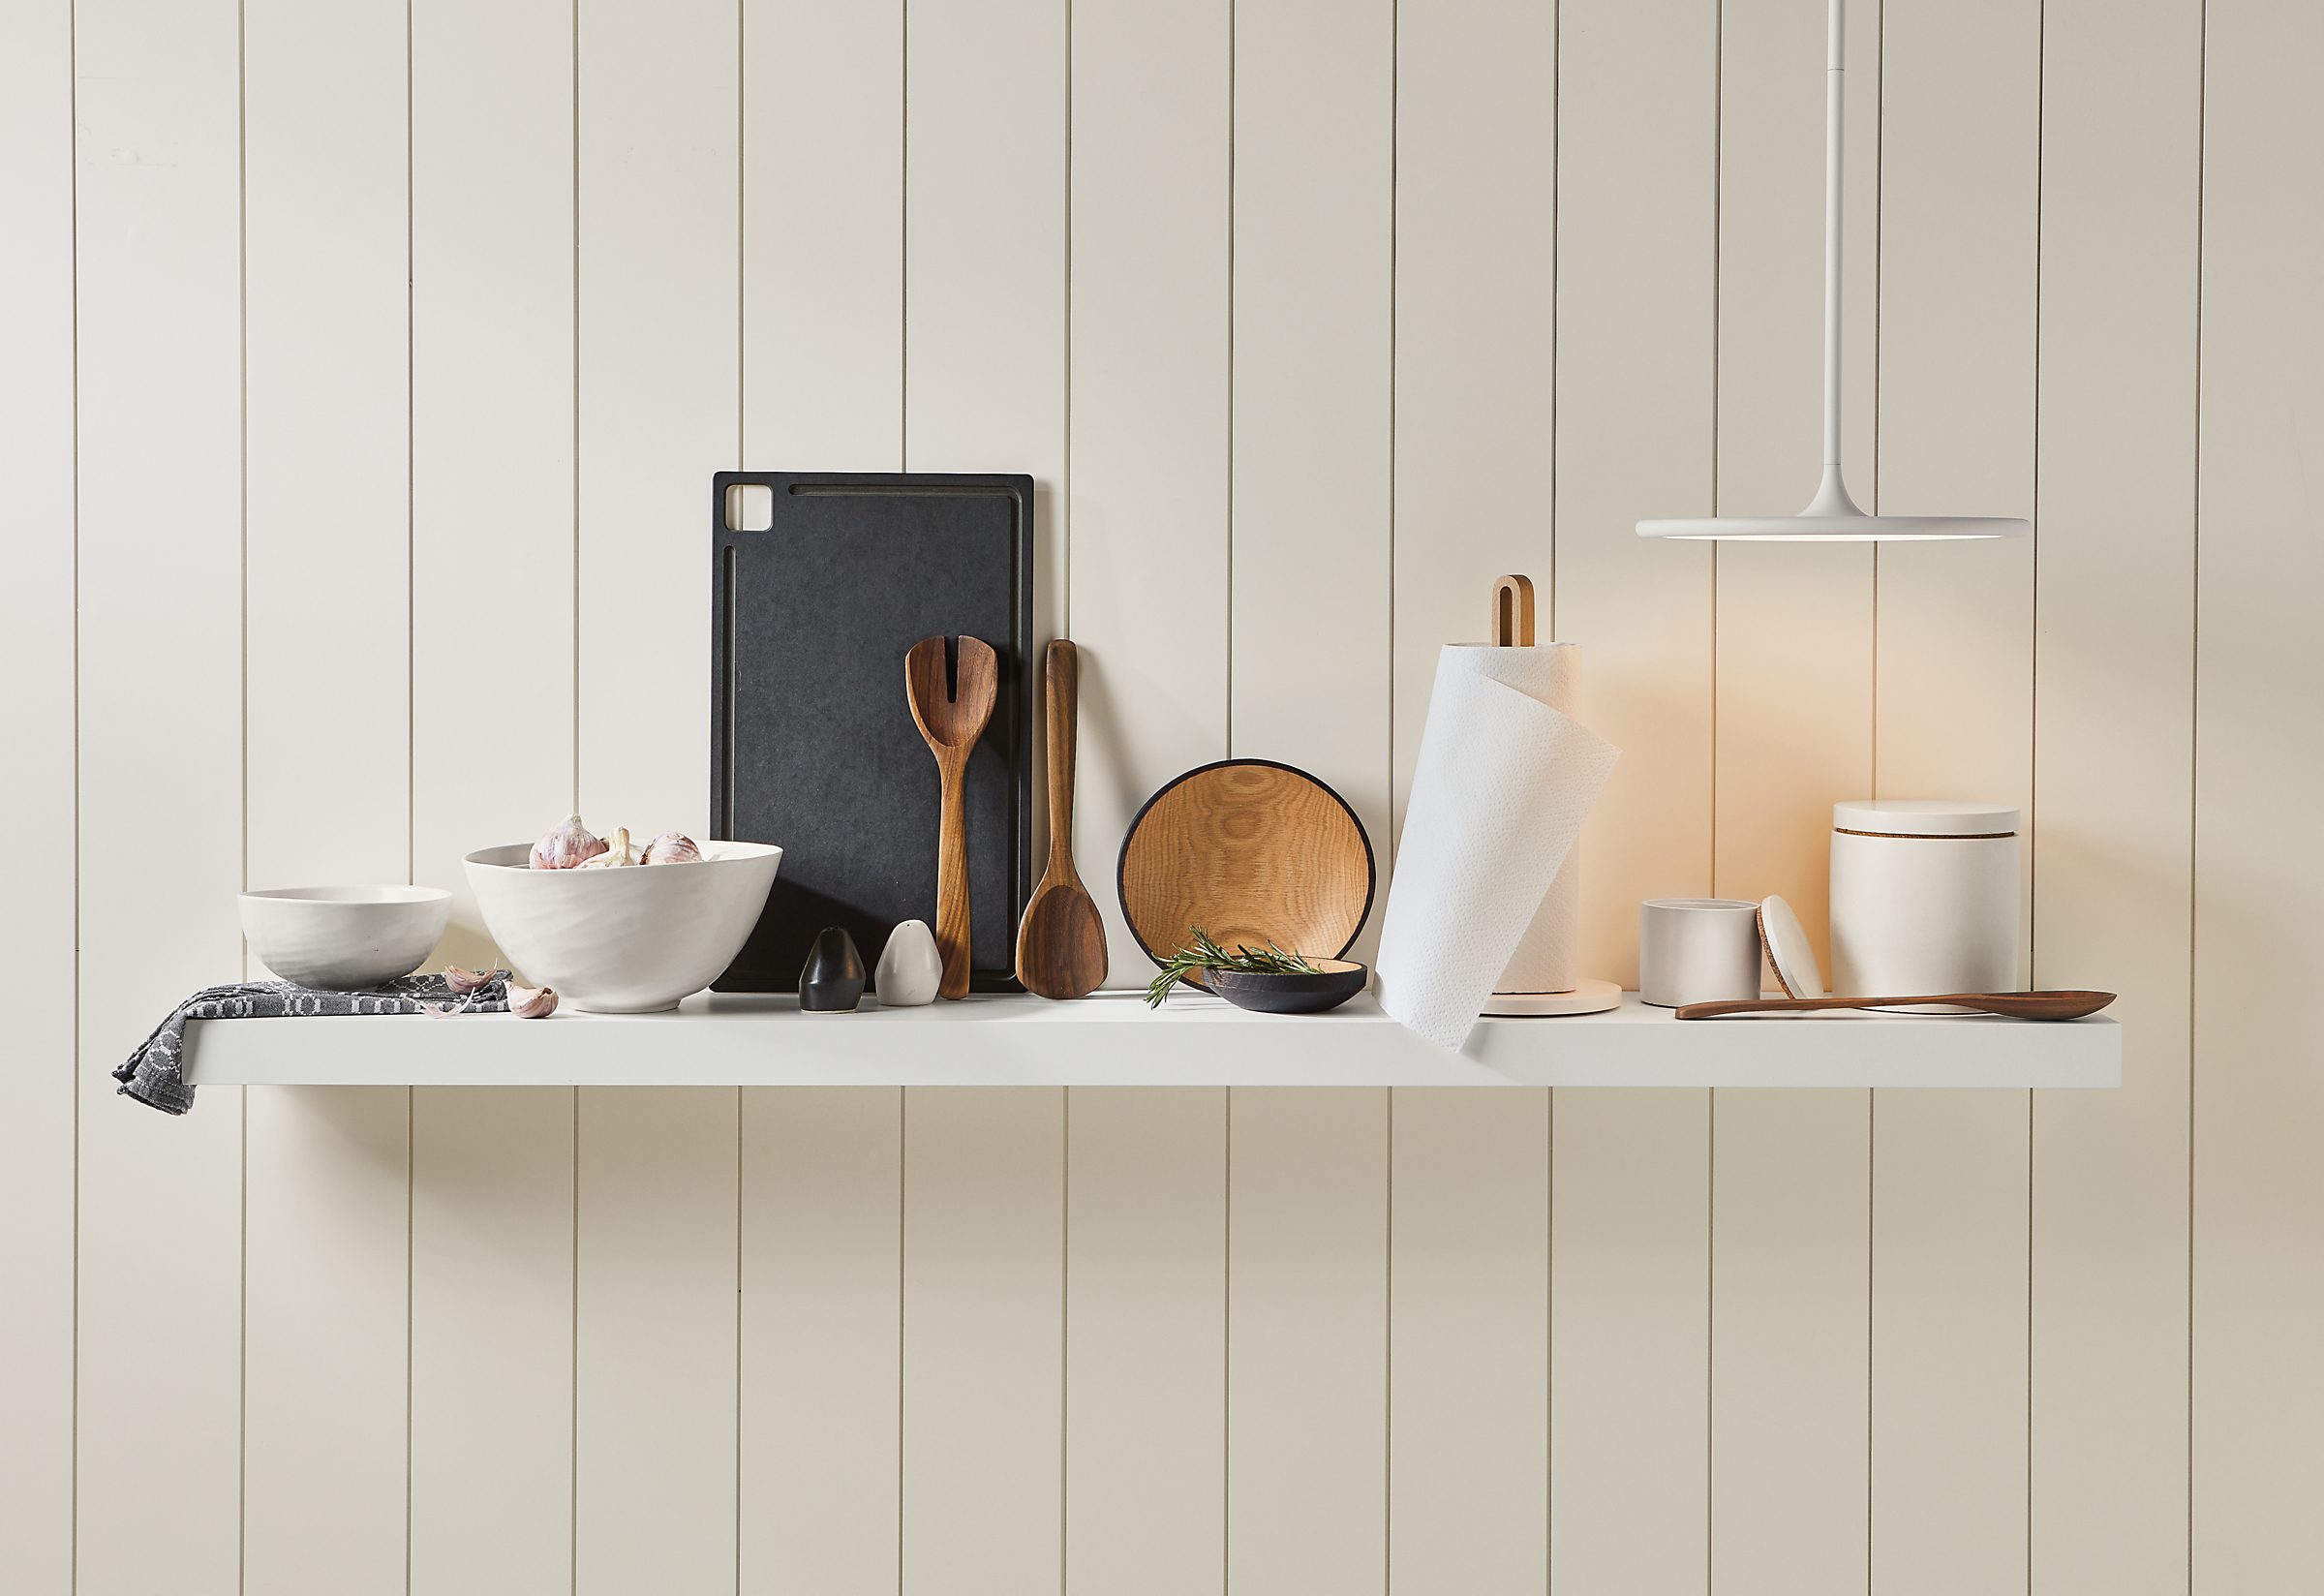 Kitchen setting with Anya bowls in white and a variety of kitchen accessories.